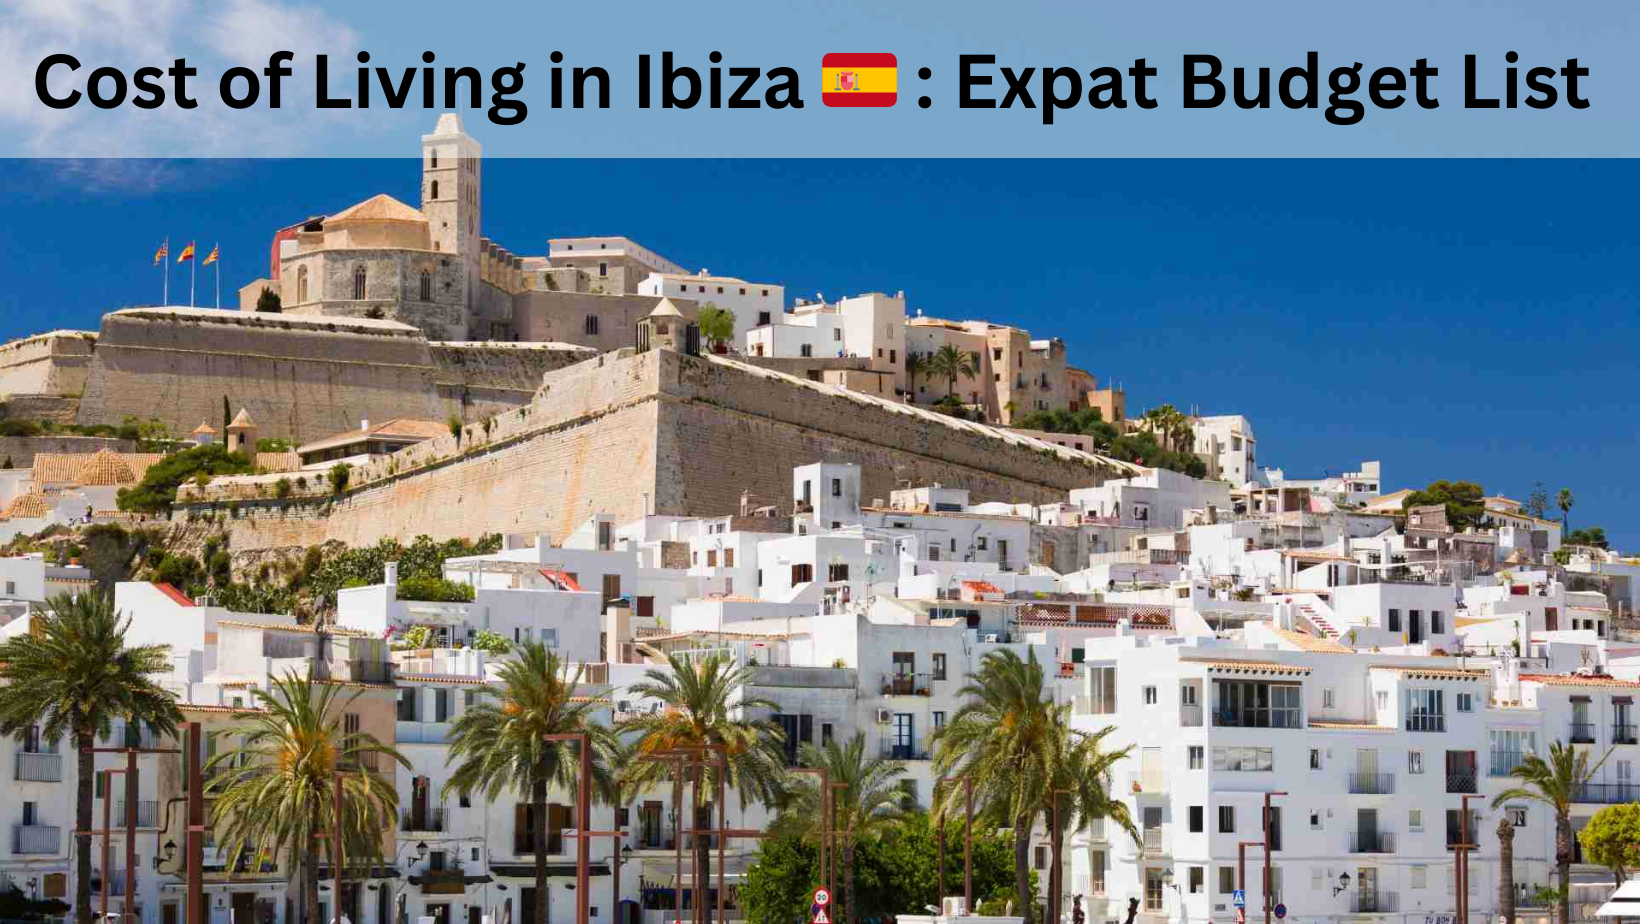 Cost of Living in Ibiza: [year] Expat Budget List (Rent, Transportation, Finances)